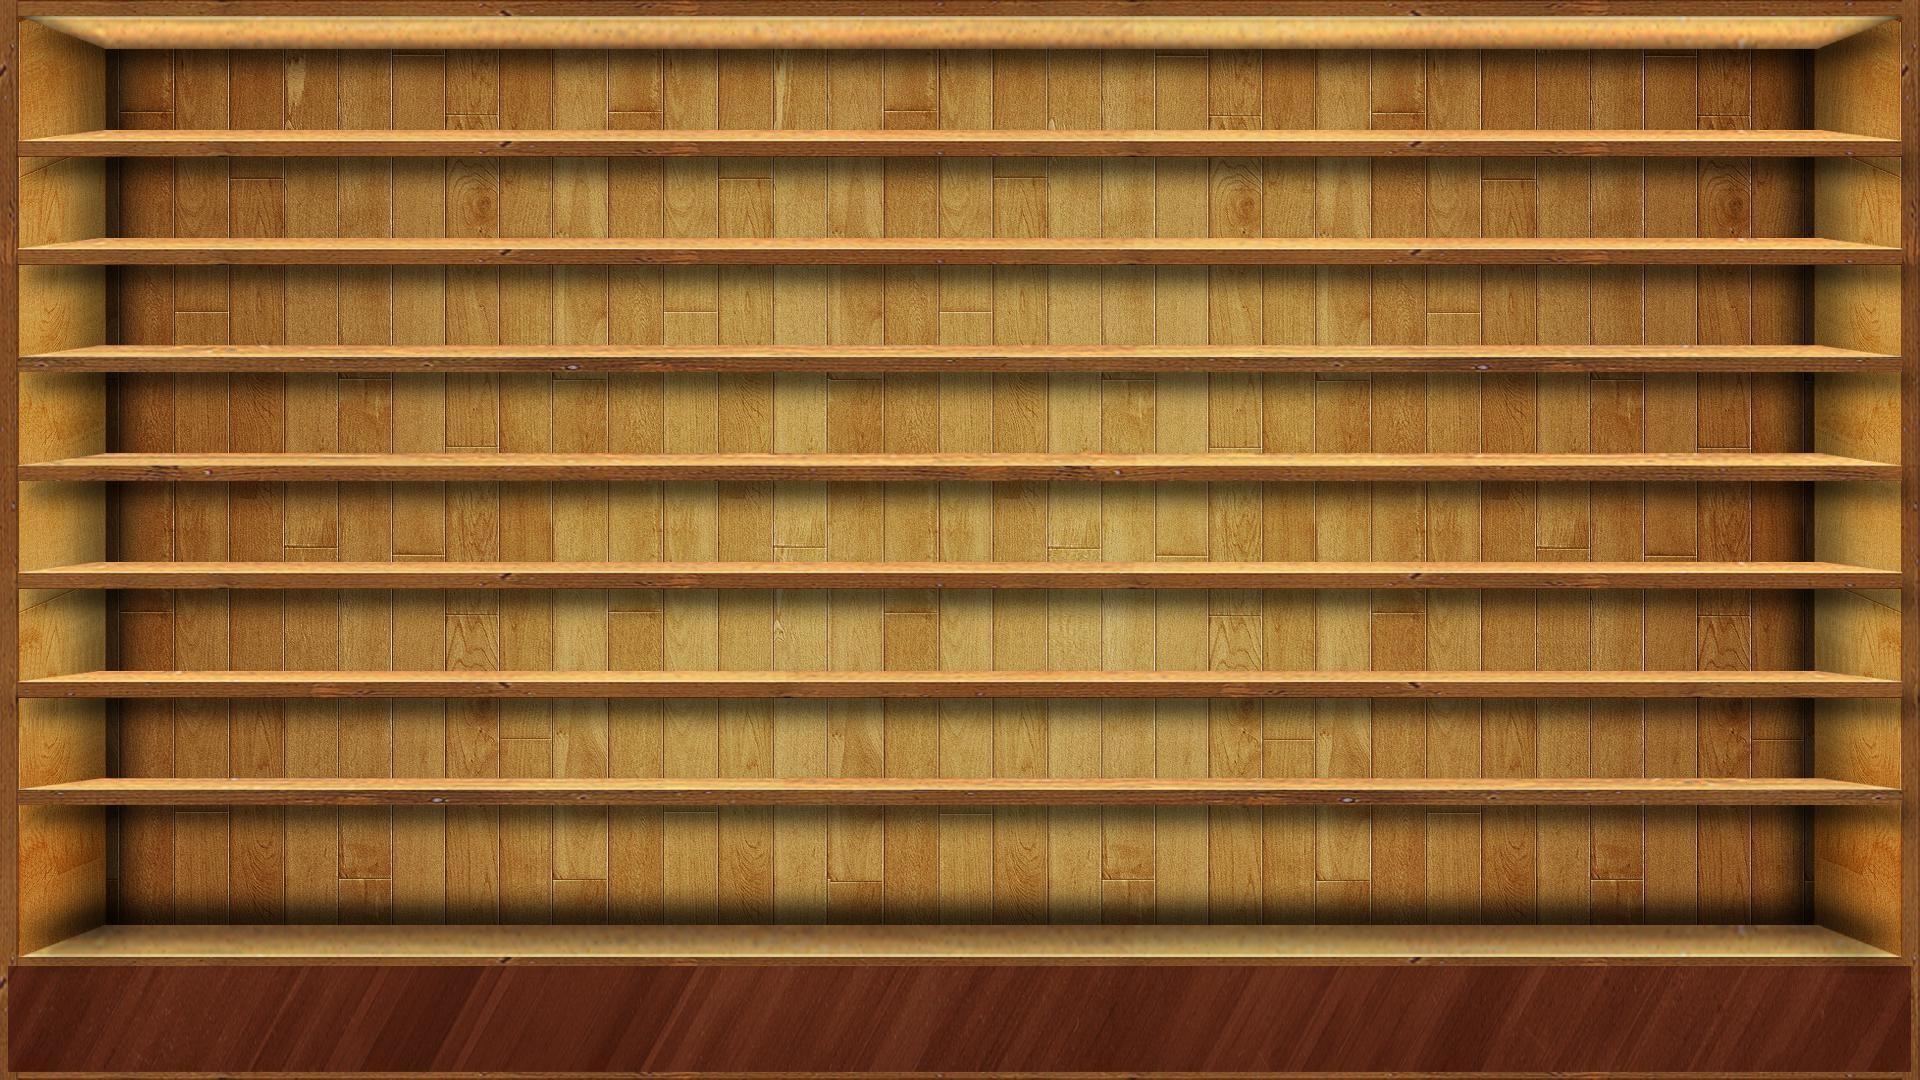 Empty Shelves Bookcase Library Stock Image  Image of office furniture  37664861